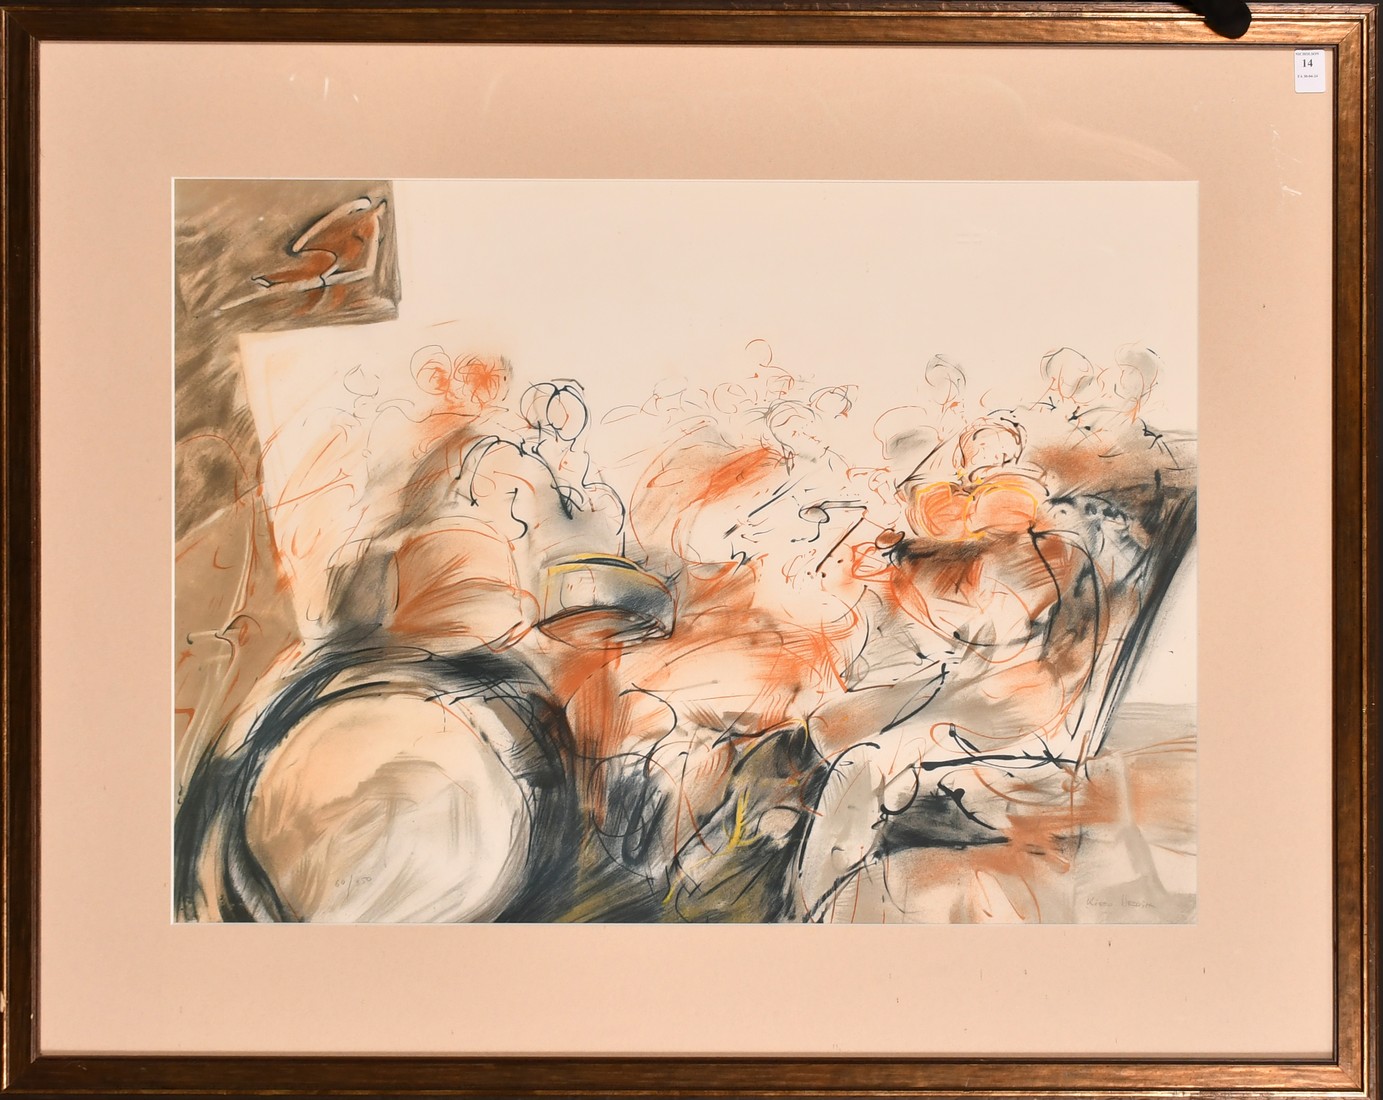 Kiro Urdin (b. 1945), figures in a musical ensemble, lithograph, signed in pencil and numbered 60/ - Image 2 of 4